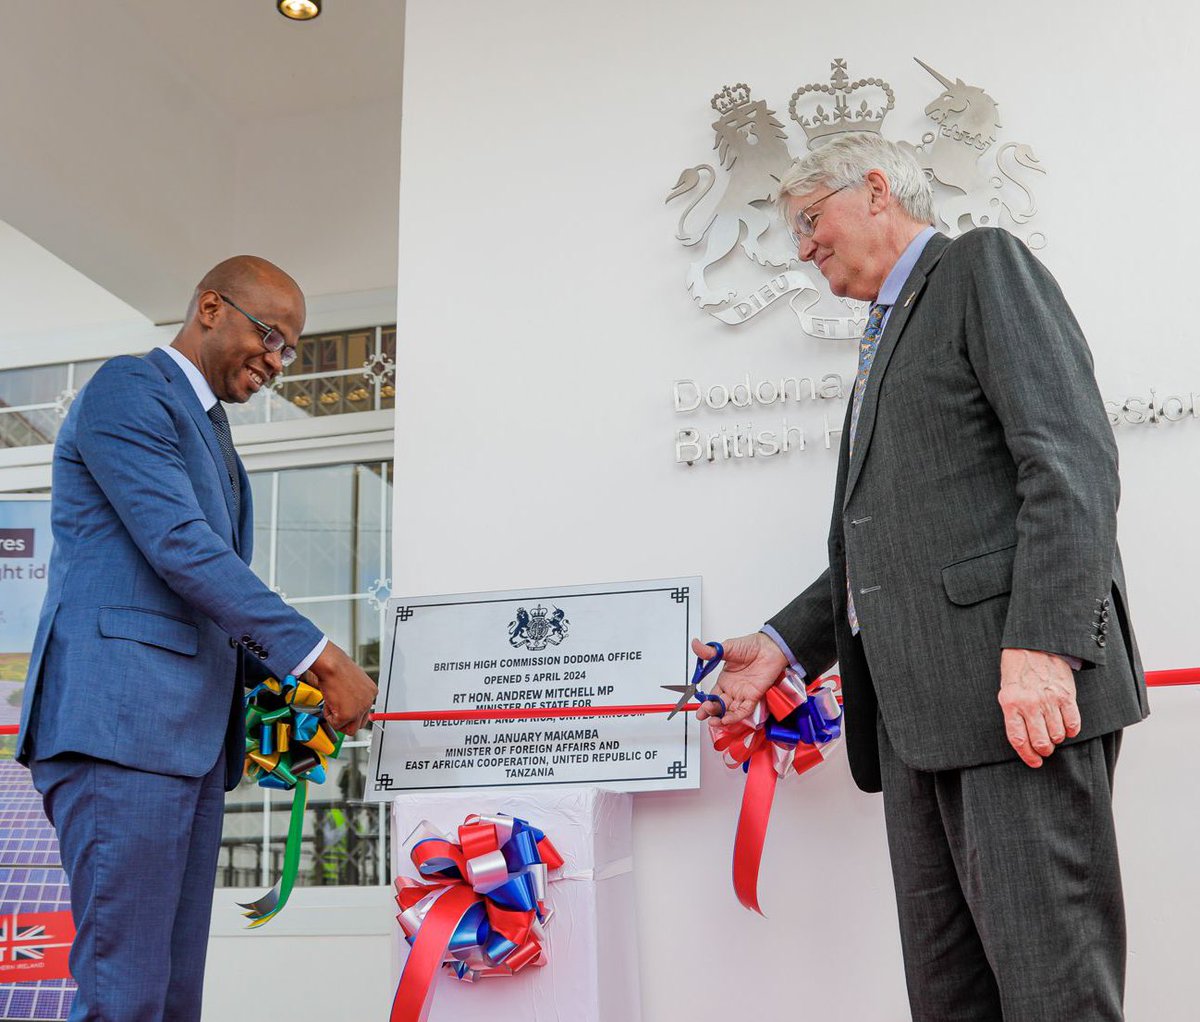 The British High Commission, Dodoma Office is open! 🇬🇧🇹🇿 UK Minister for Development and Africa @AndrewmitchMP together with Tanzanian Foreign Minister @JMakamba officially opened the newest UK overseas office earlier today 🤝